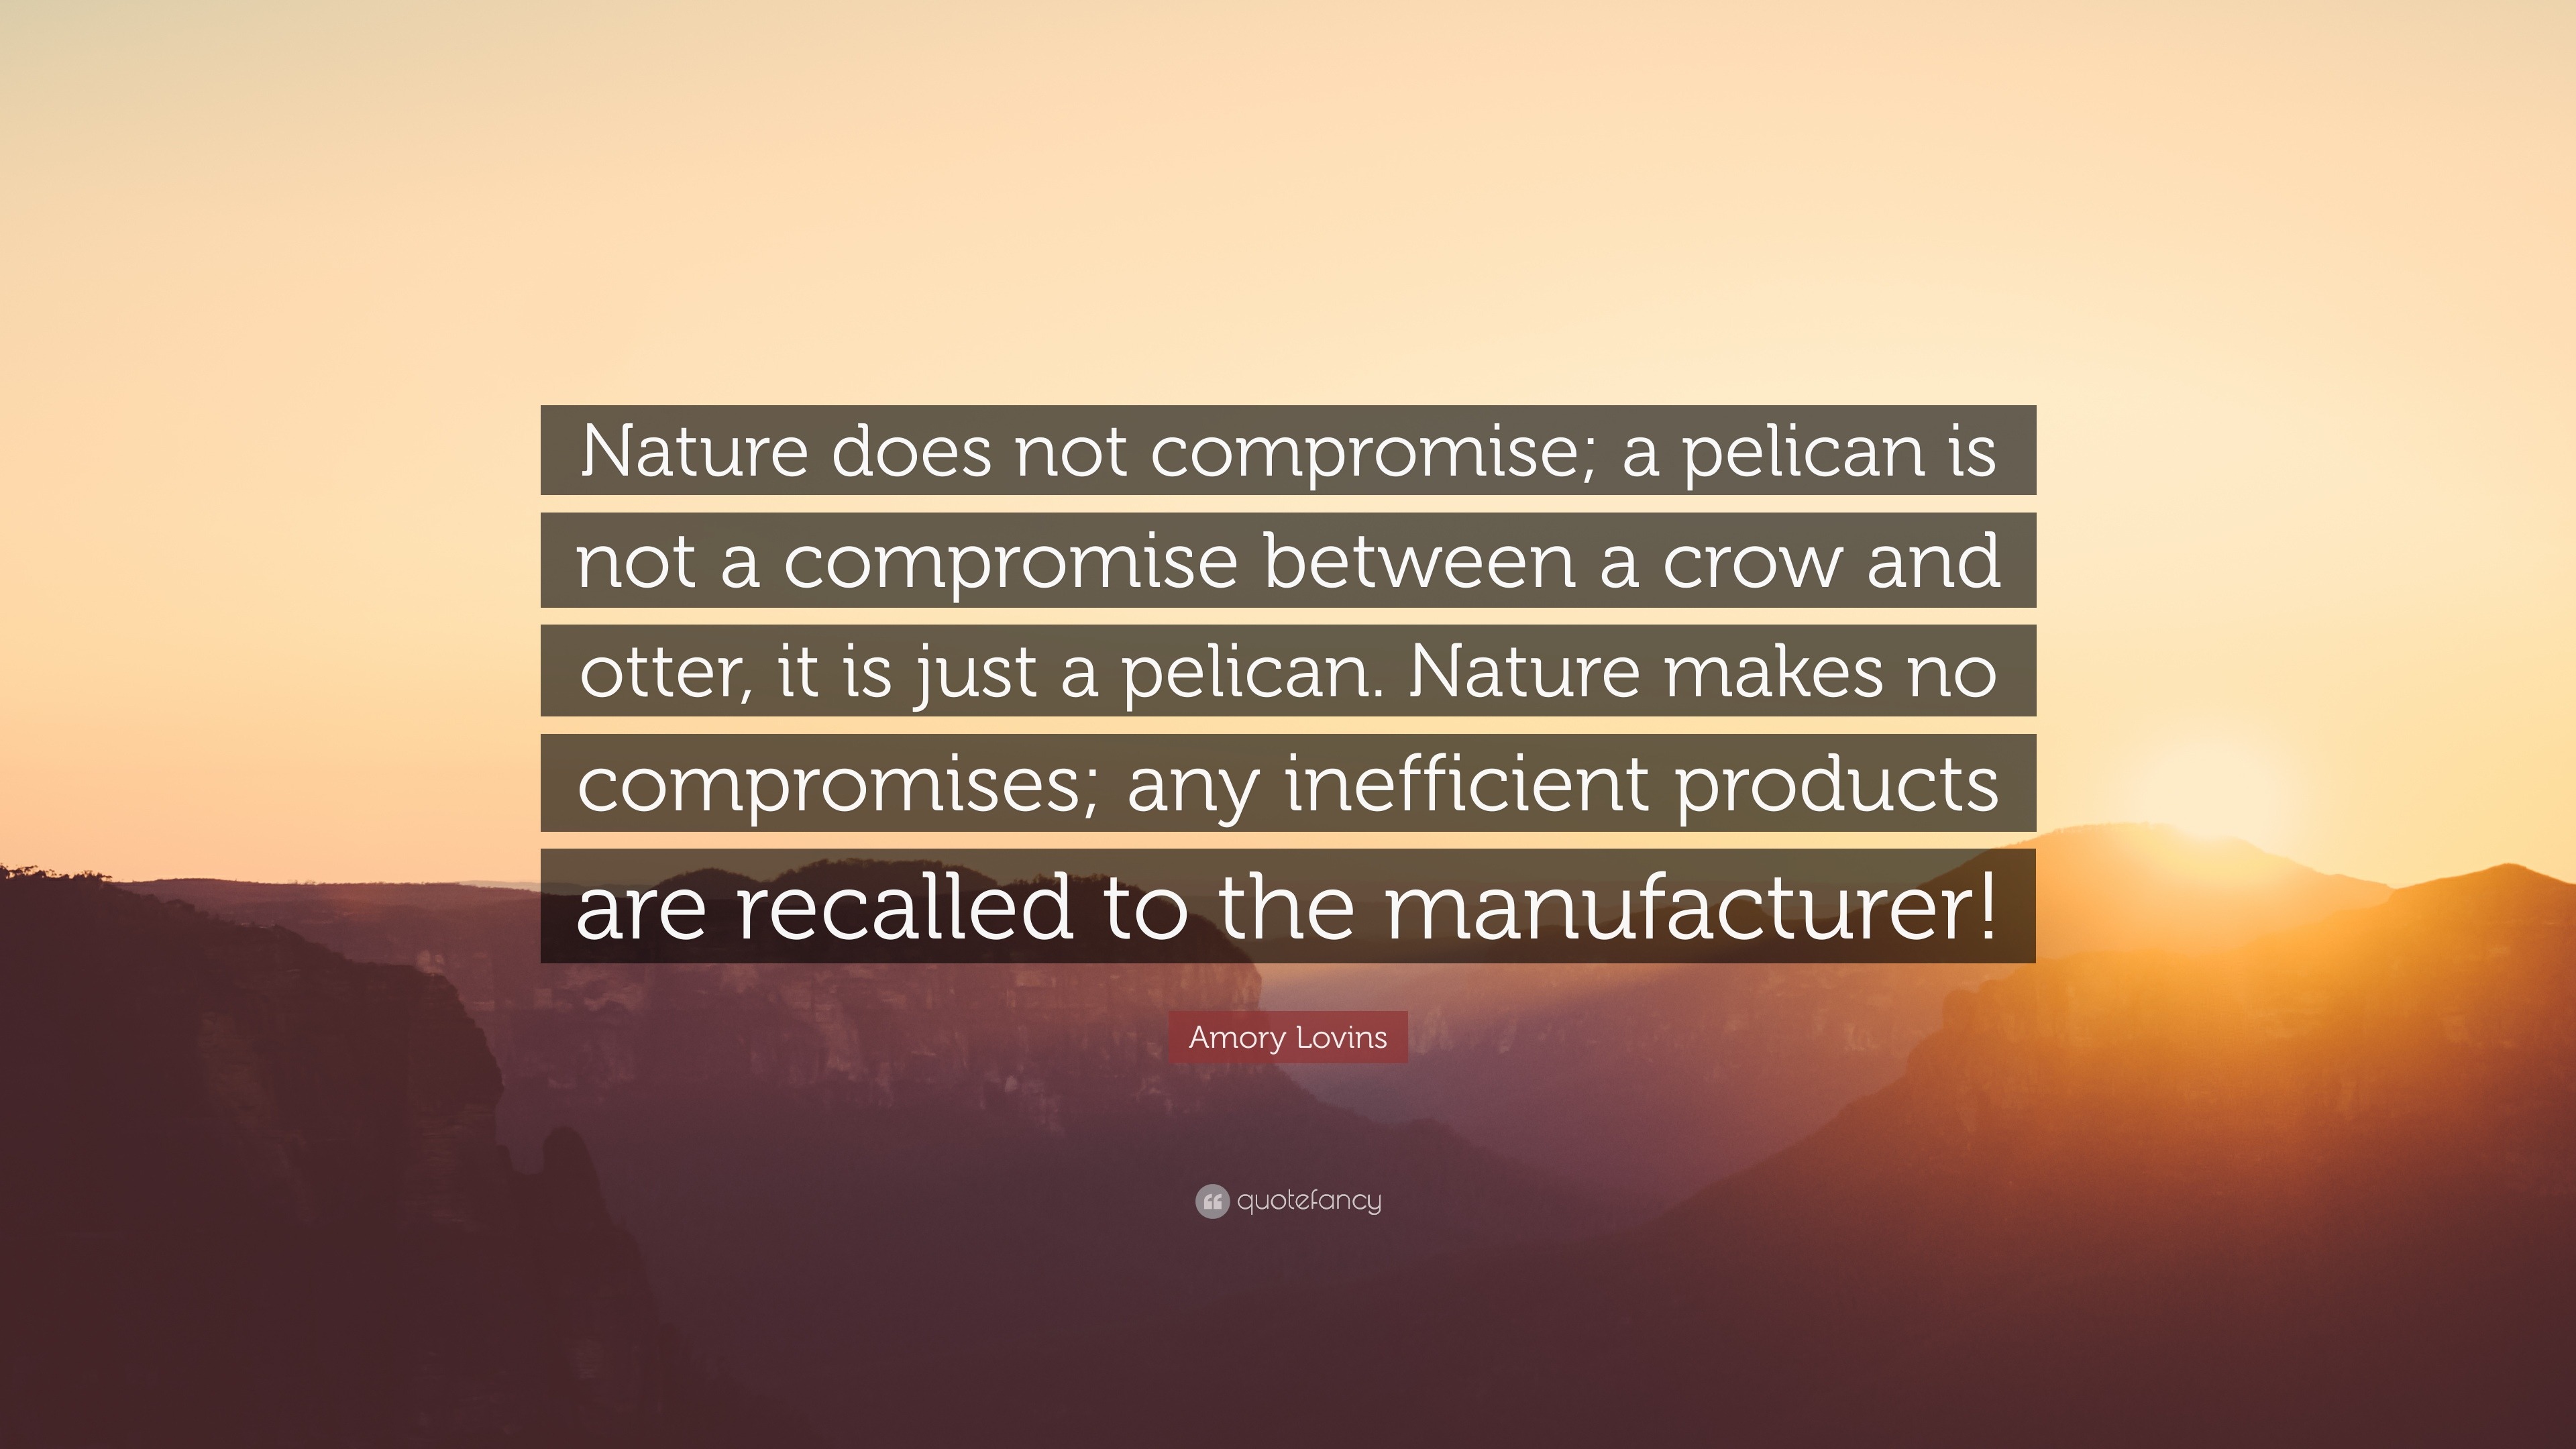 Amory Lovins Quote: “Nature does not compromise; a pelican is not a  compromise between a crow and otter, it is just a pelican. Nature makes  n”